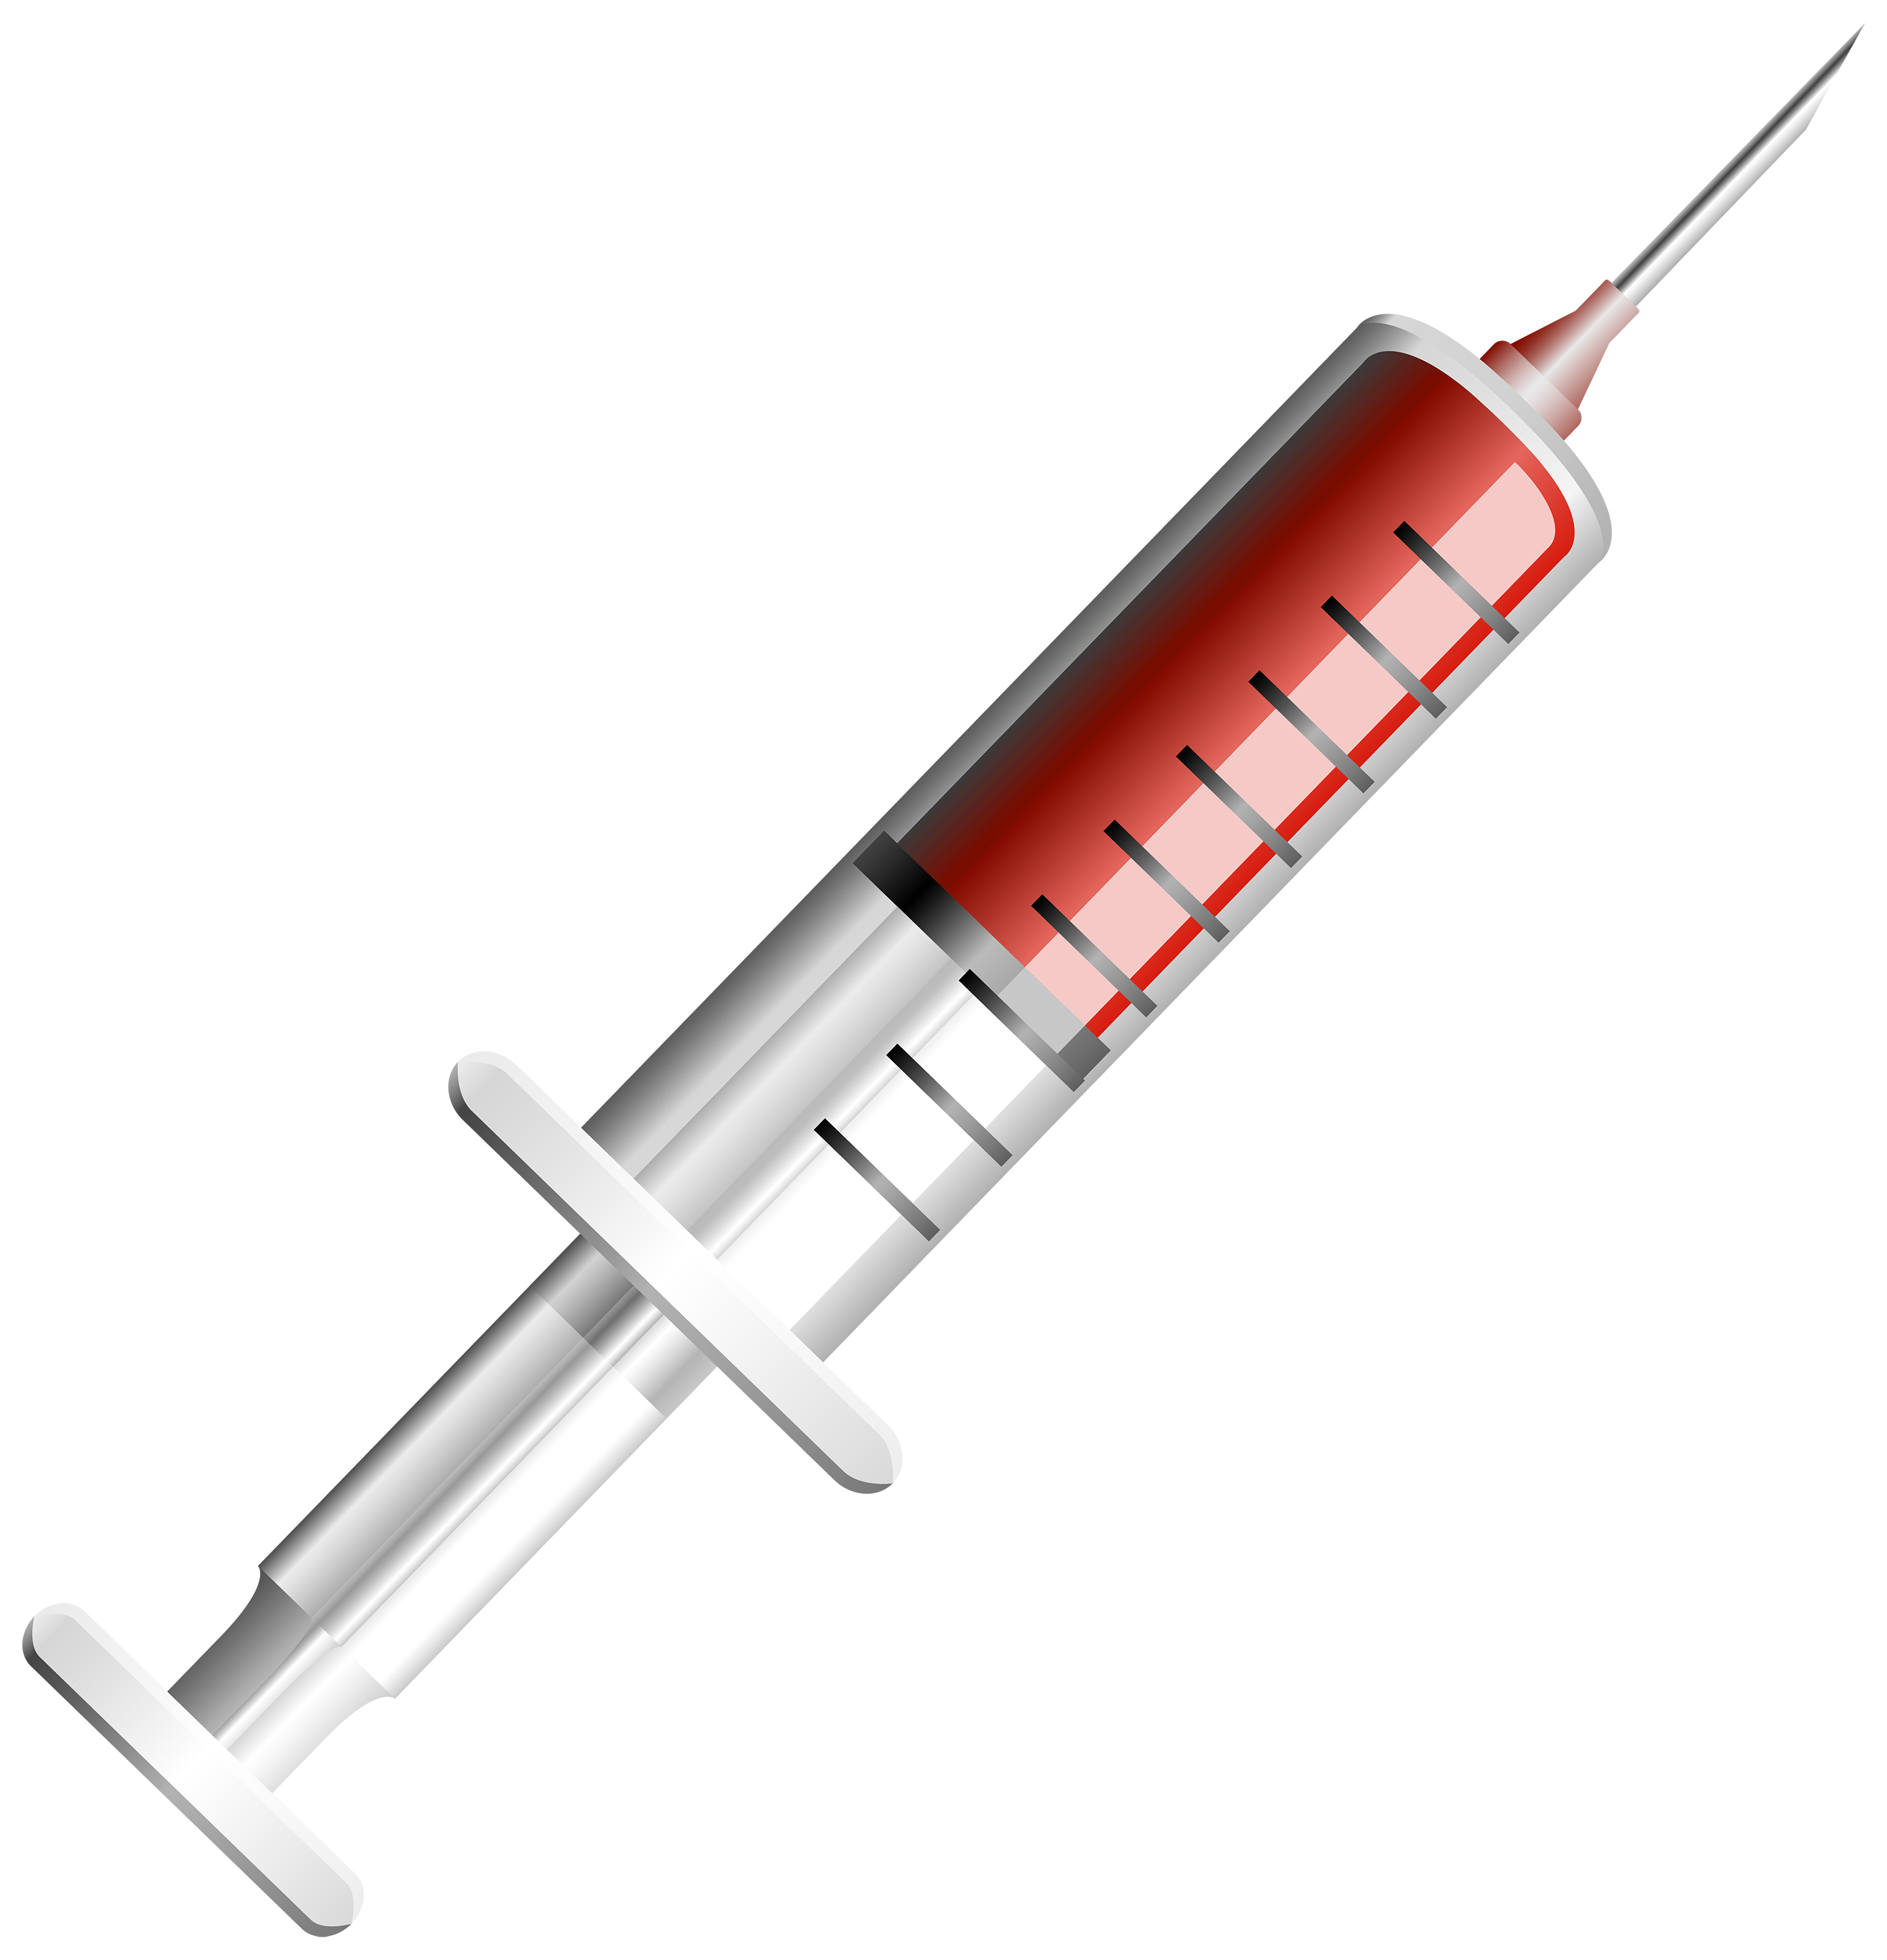 Syringe images download pics. Clipart gallery night at museum